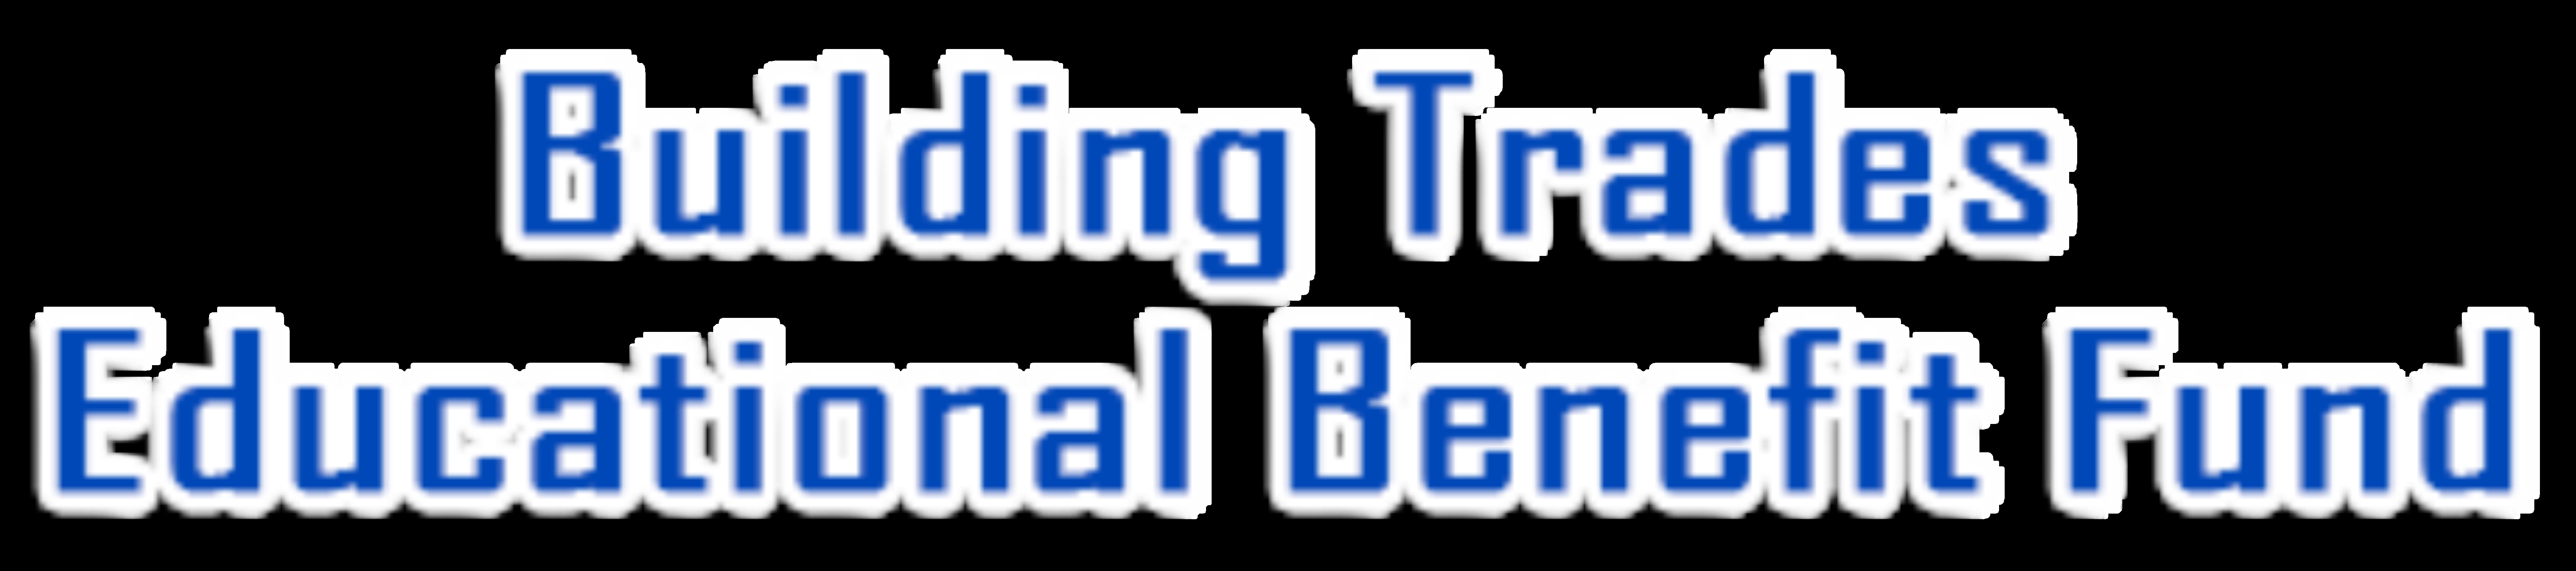 Building Trades Educational Benefit Fund's logo